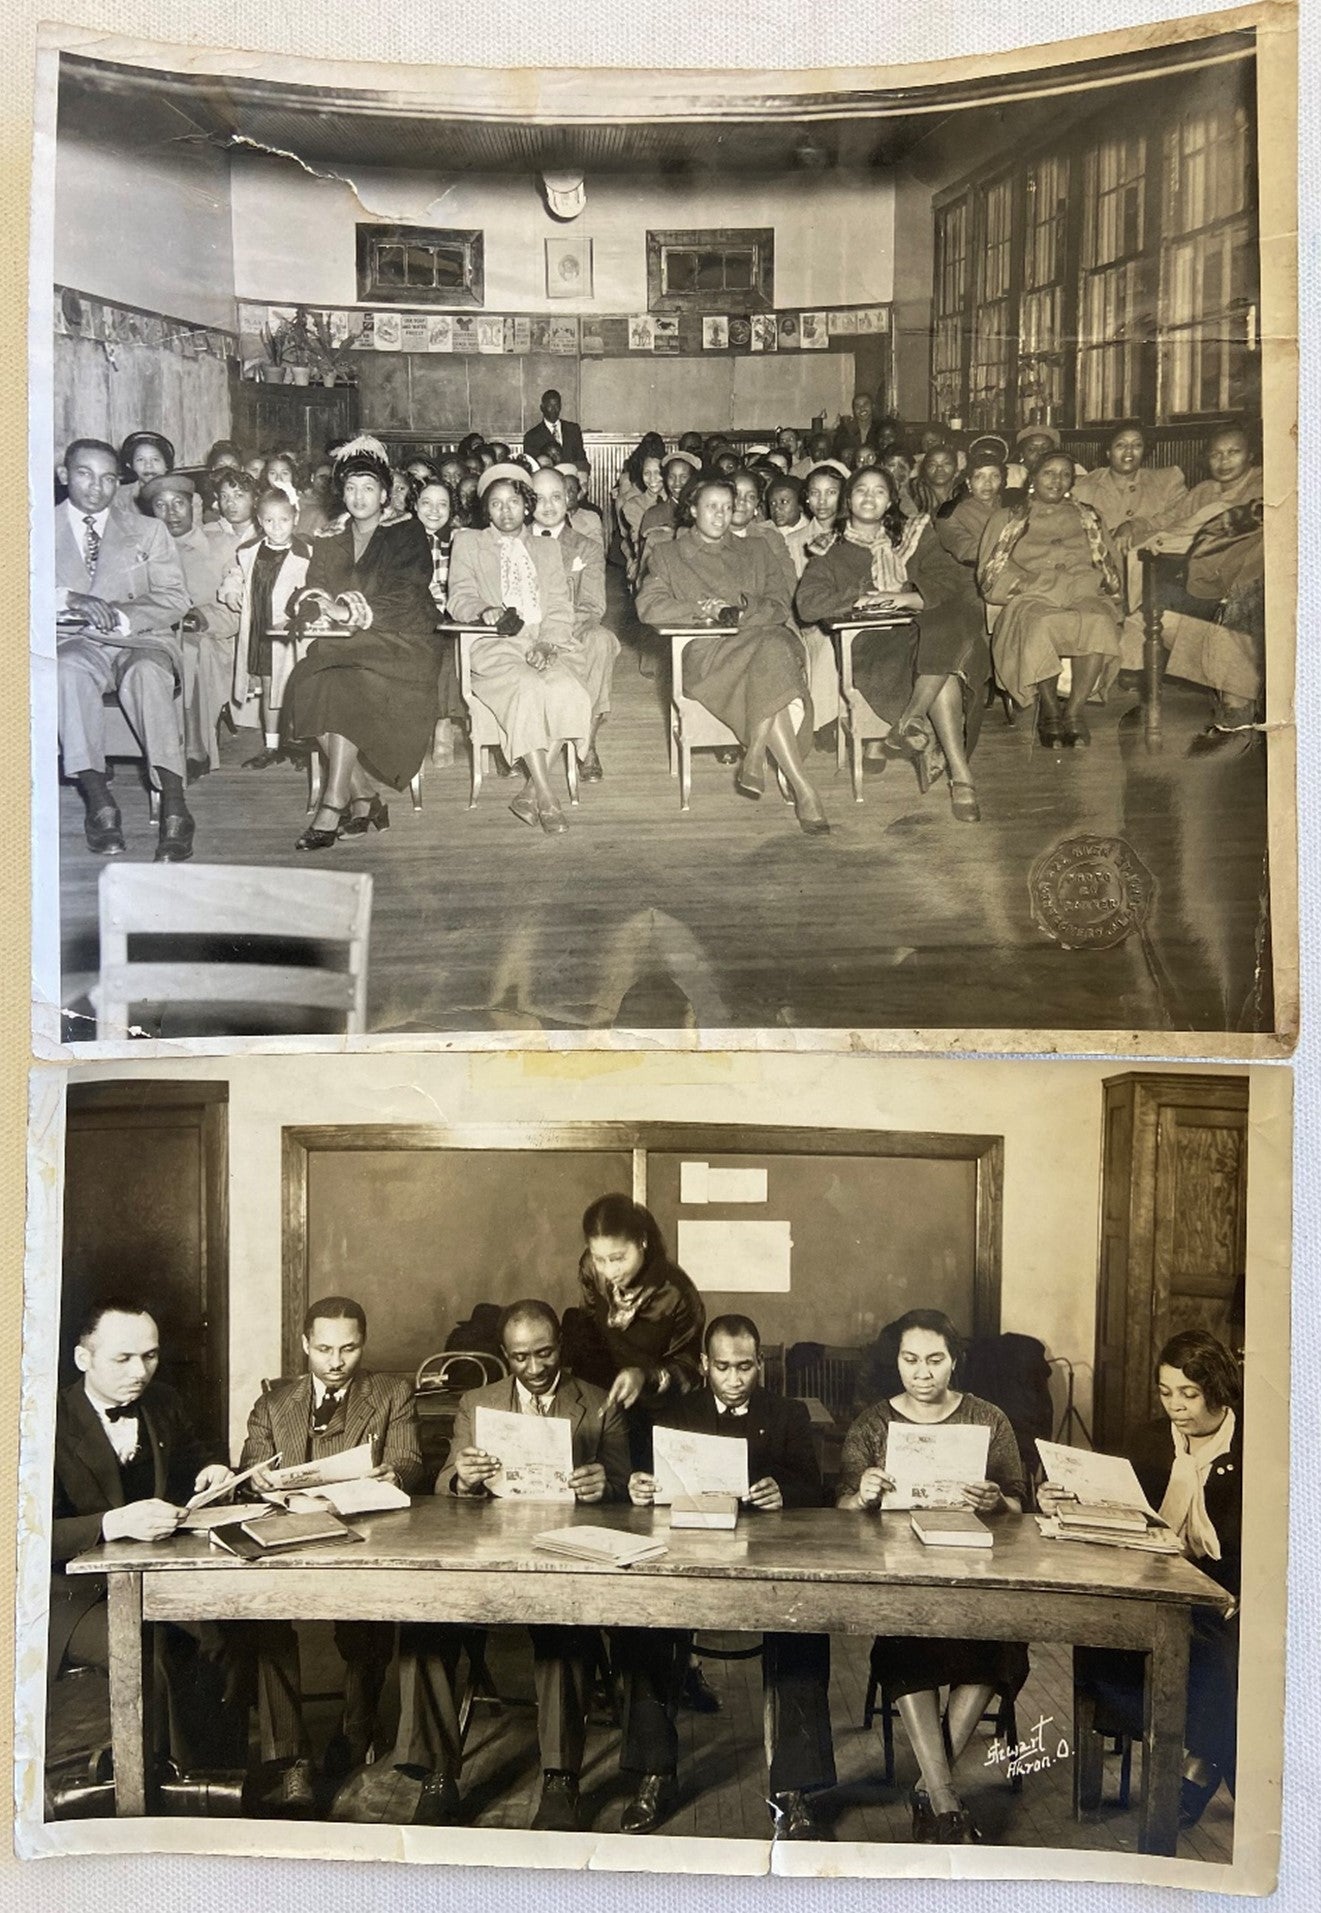 Photo Album of African American Extended Family Life C. 1930-1960 by Family  life African American on Max Rambod